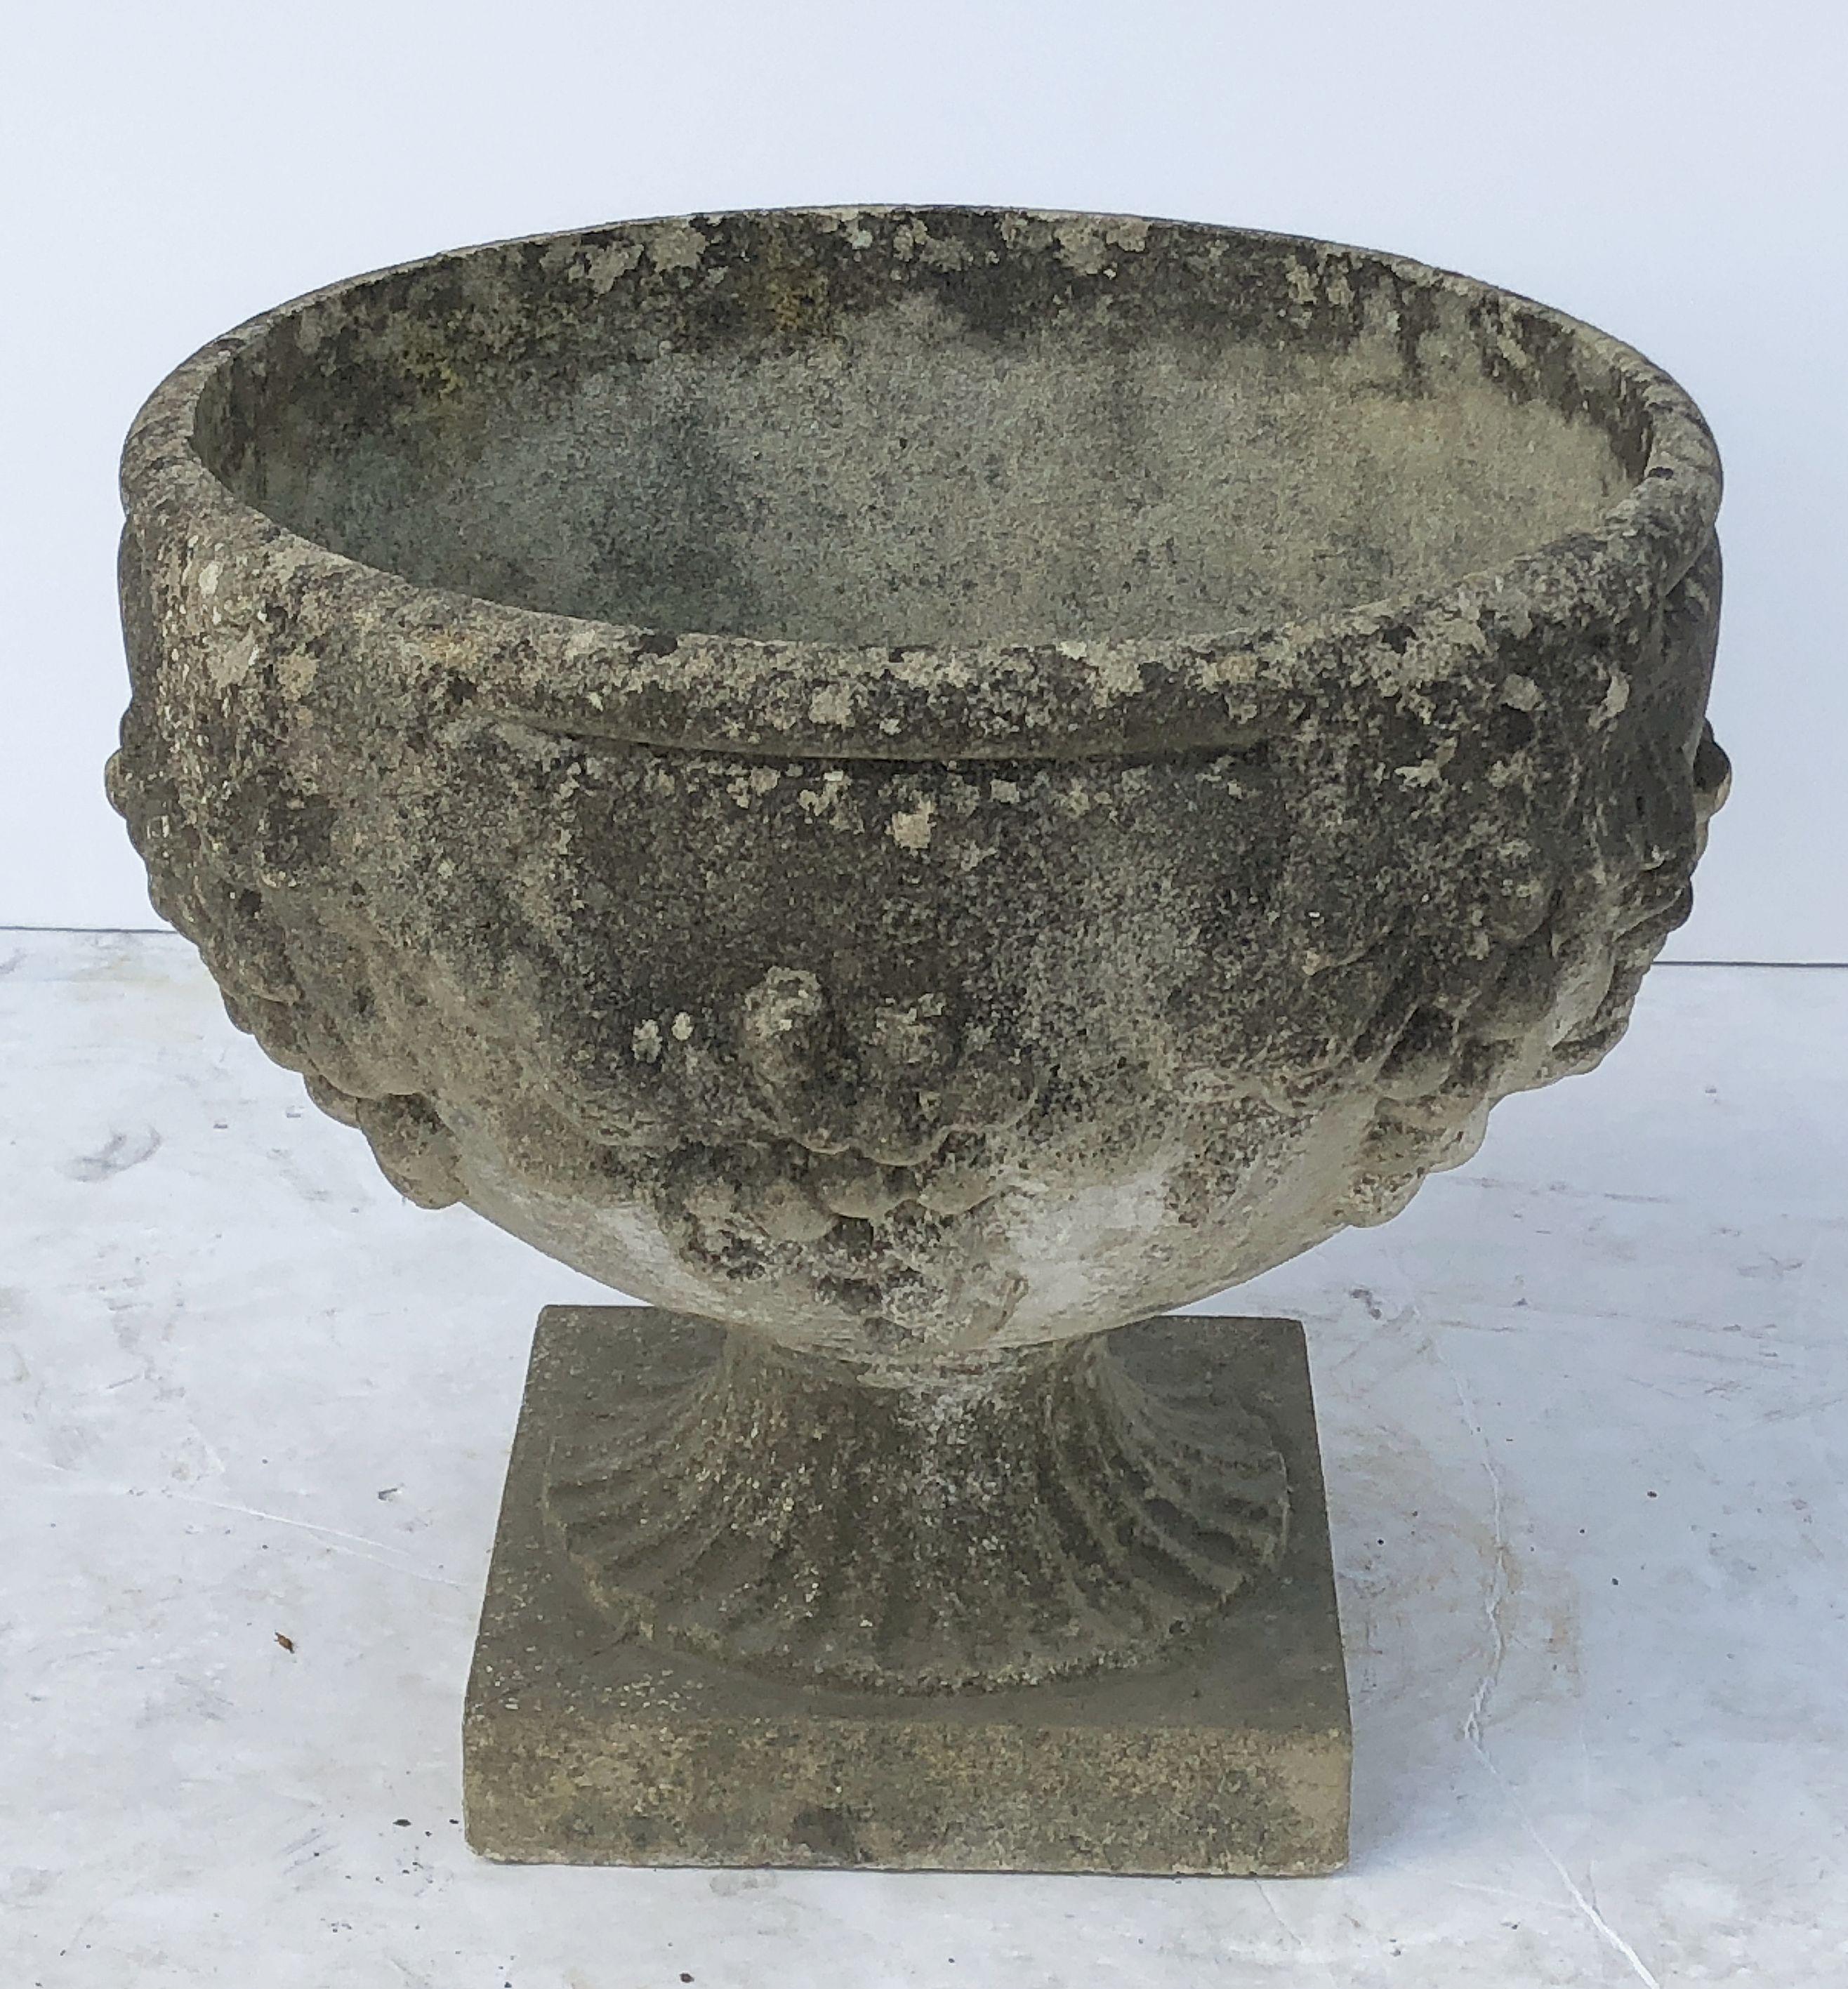 A fine English garden planter or urn (jardinière or pot) of composition stone, featuring a round bowl with a relief of grapes around the circumference on a raised square plinth base with fluted design.

Perfect for an indoor or outdoor garden,